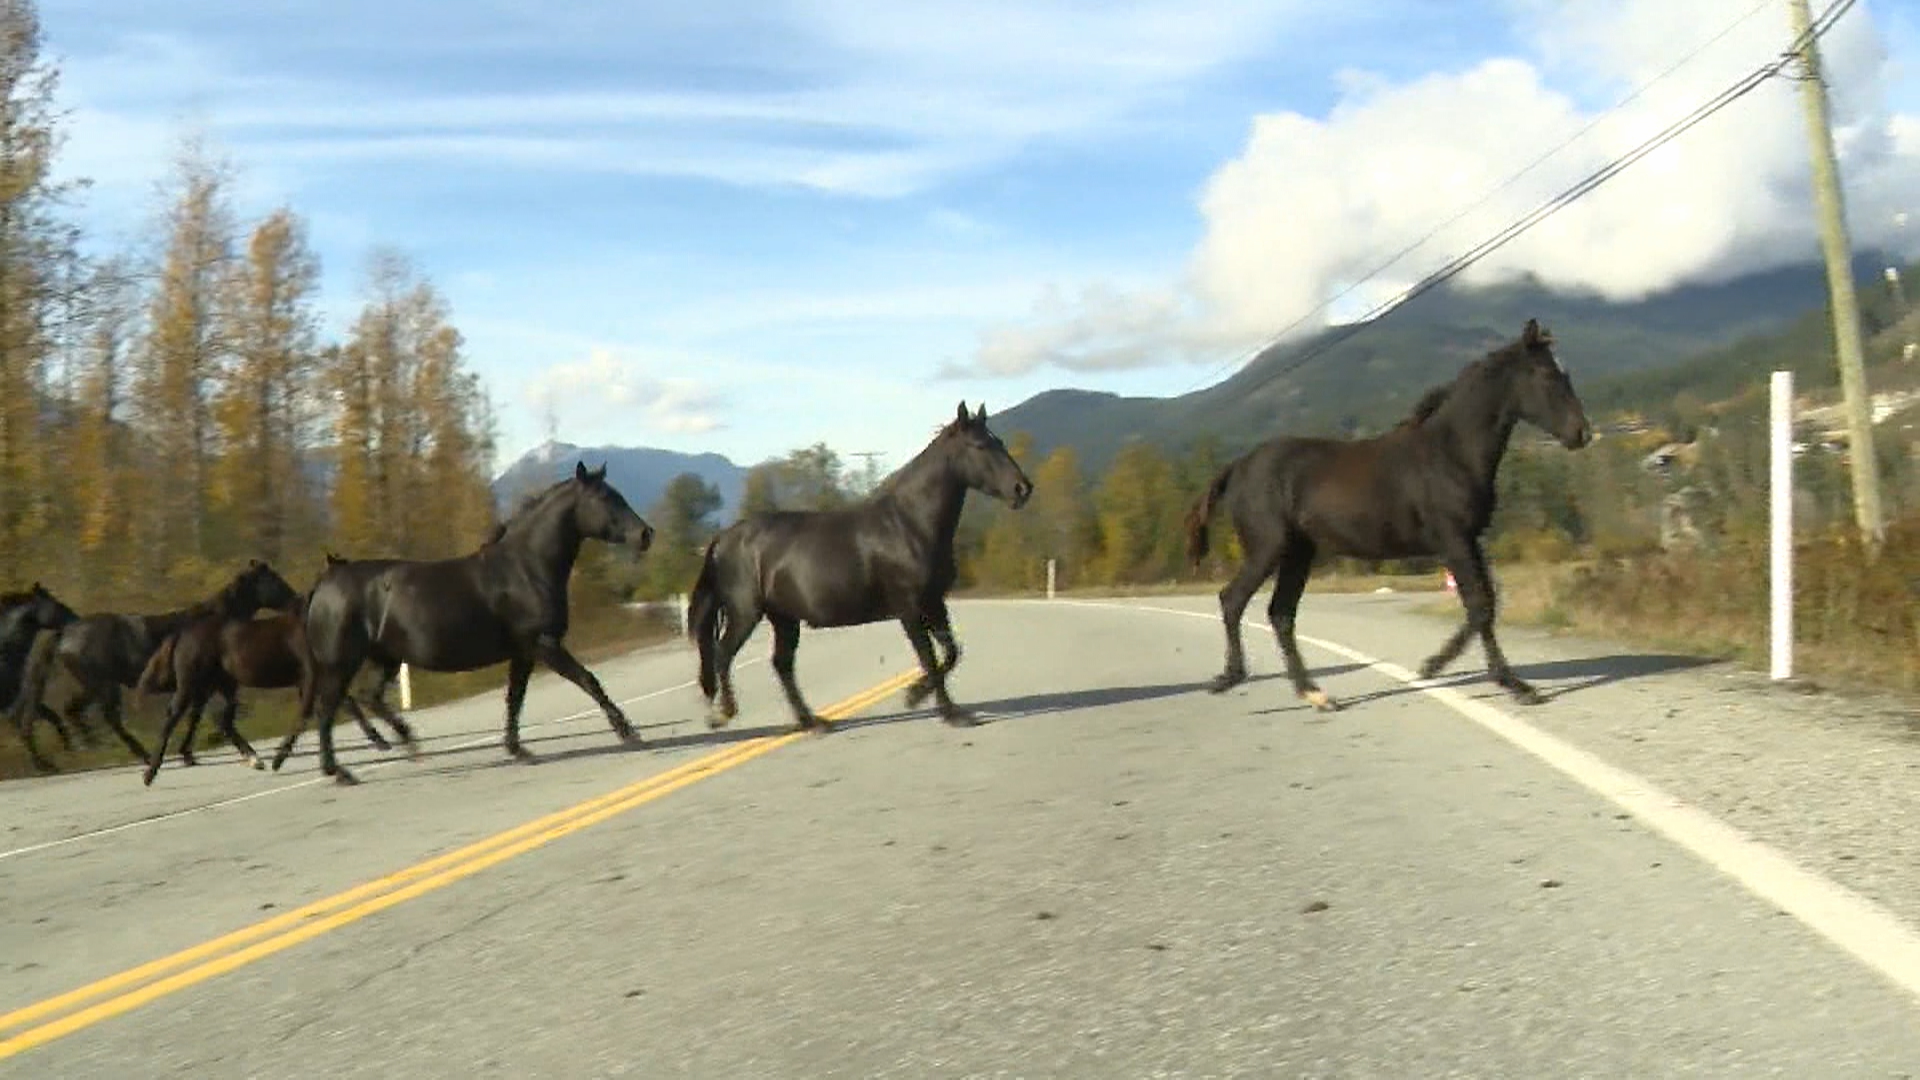 Safety concerns raised about Pemberton horses after 2 die in highway crash